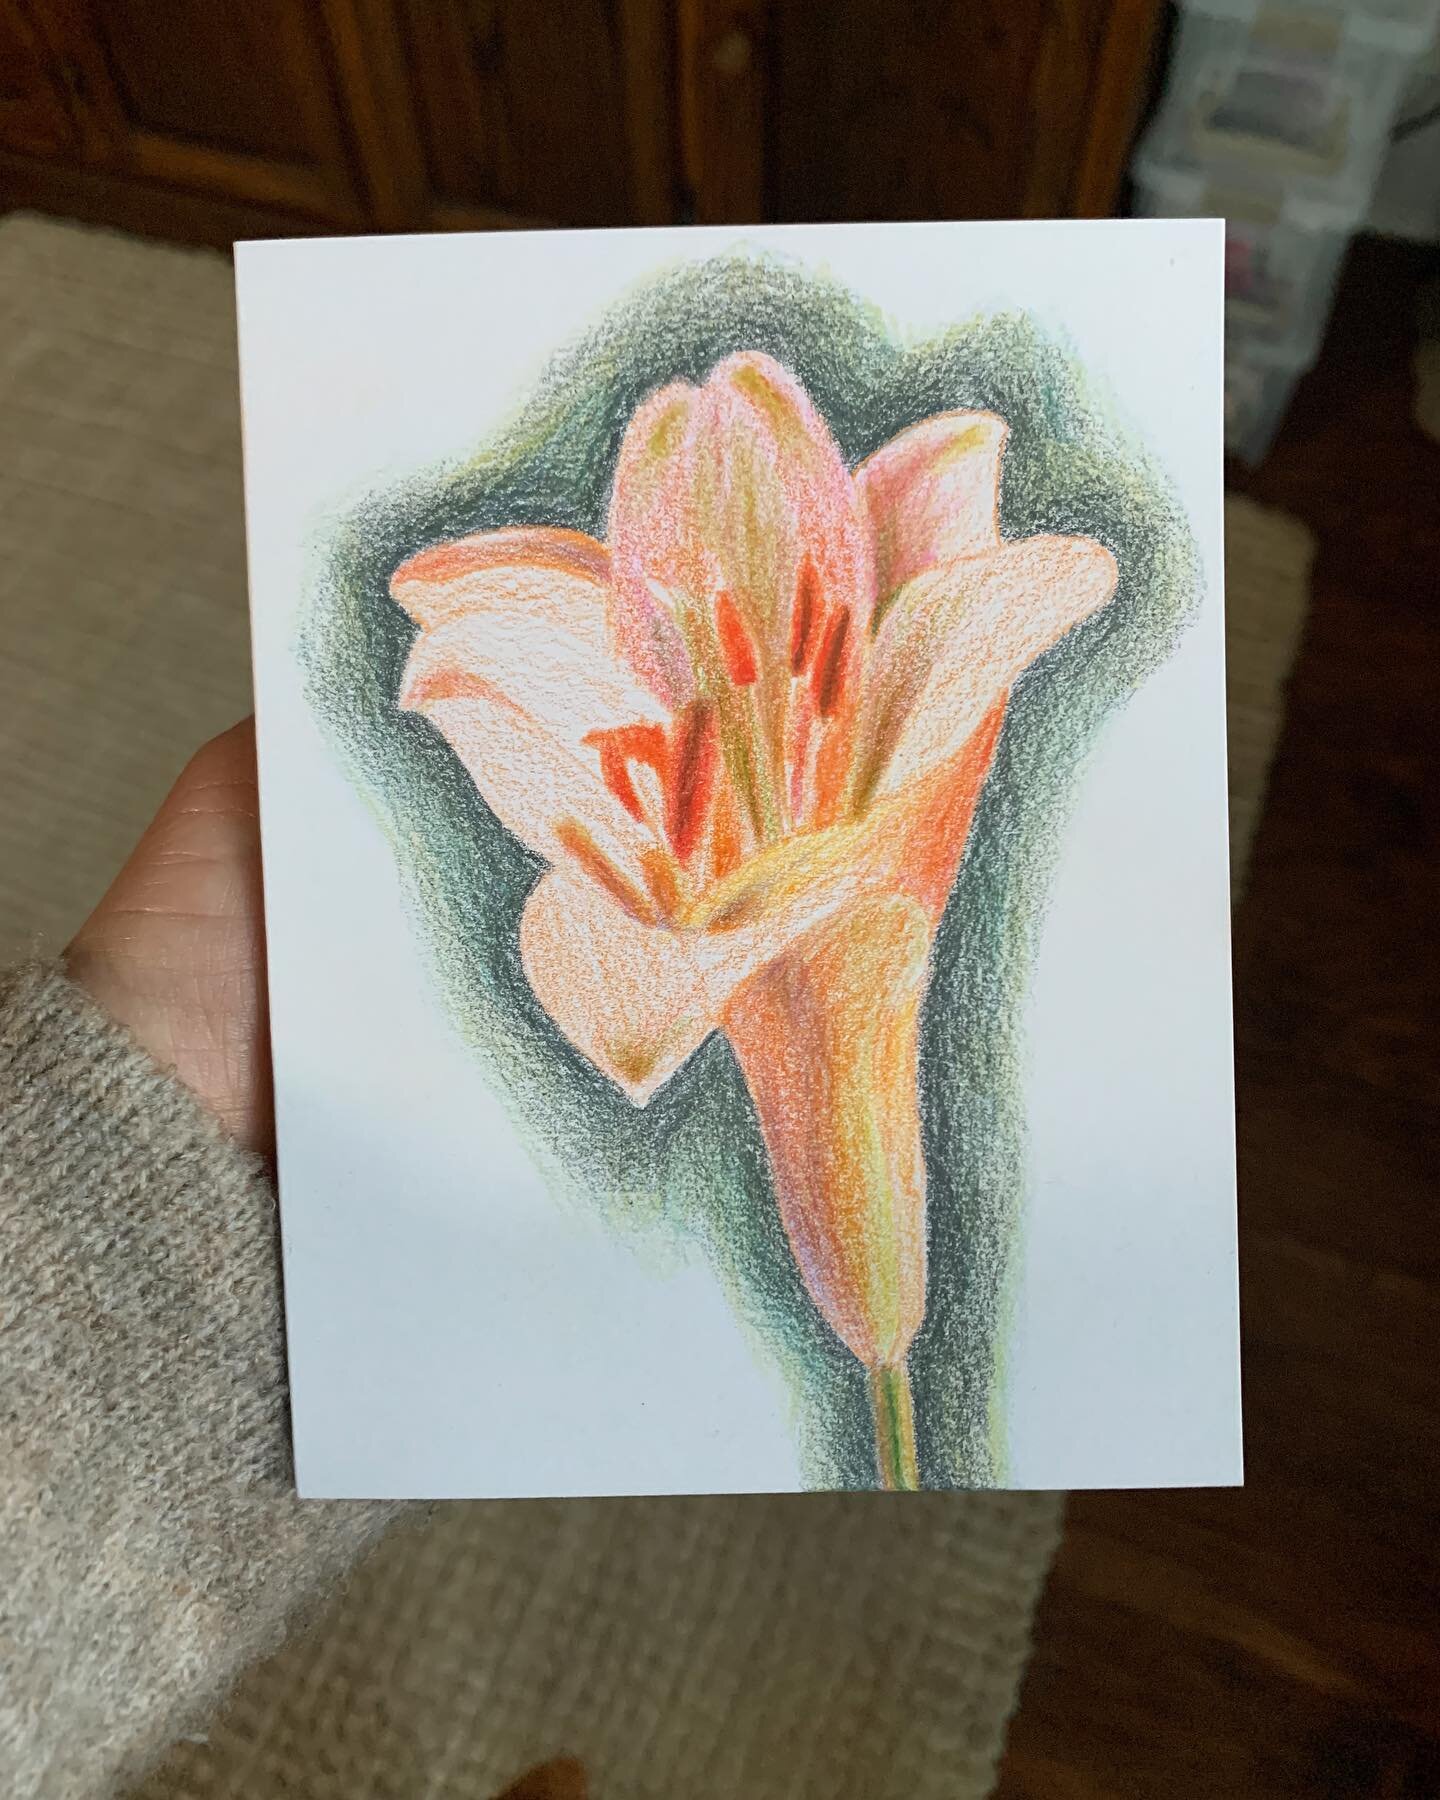 Peach colored lily 

#lilyflower #peachlily #drawingflowers #botanicalart #botanicaldrawing #coloredpencil #drawingpractice #observationaldrawing #floralart